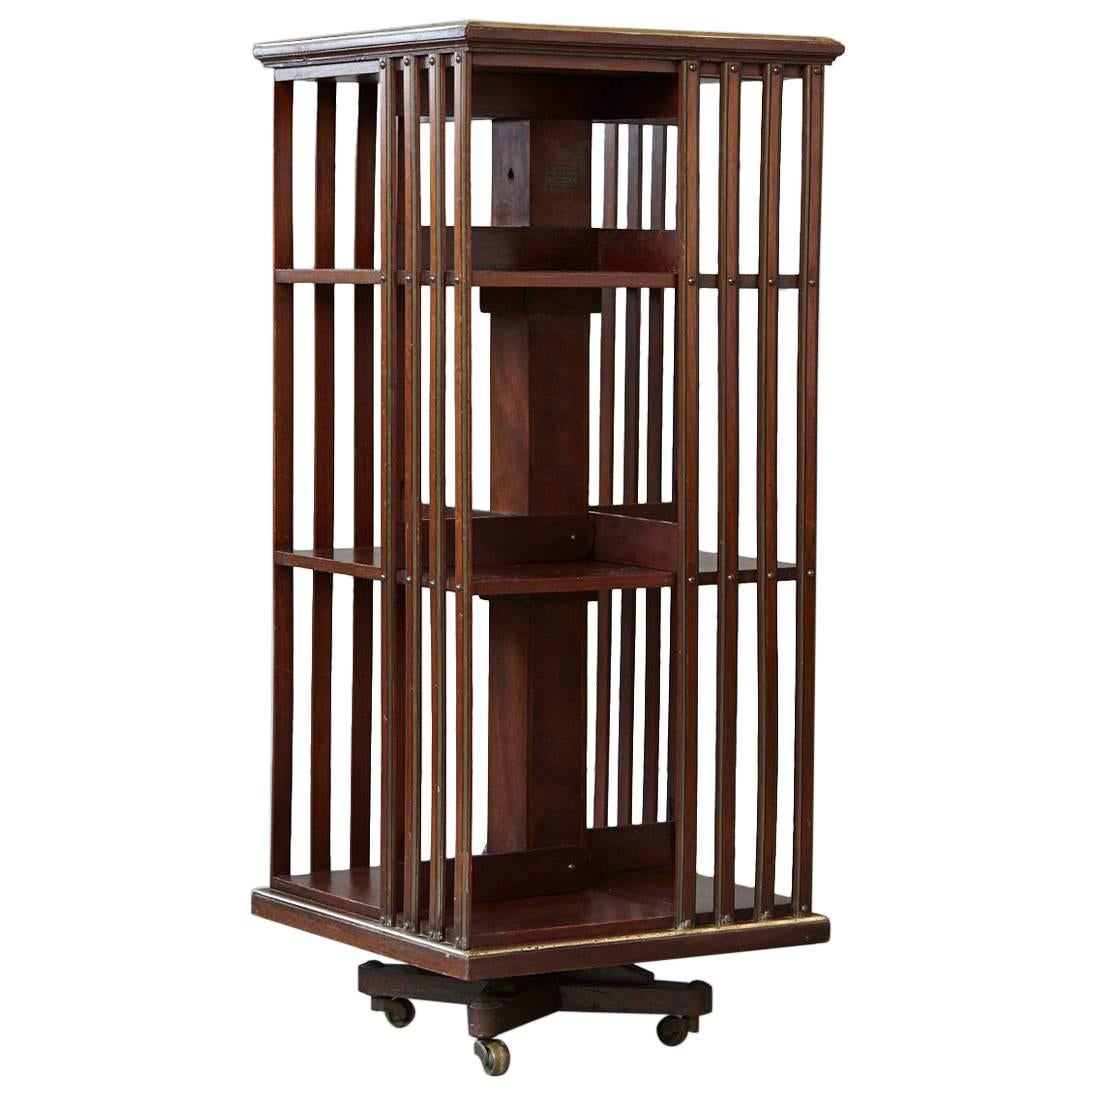 Antique French Revolving Mahogany Bookcase on Raised Casters with Brass Trim